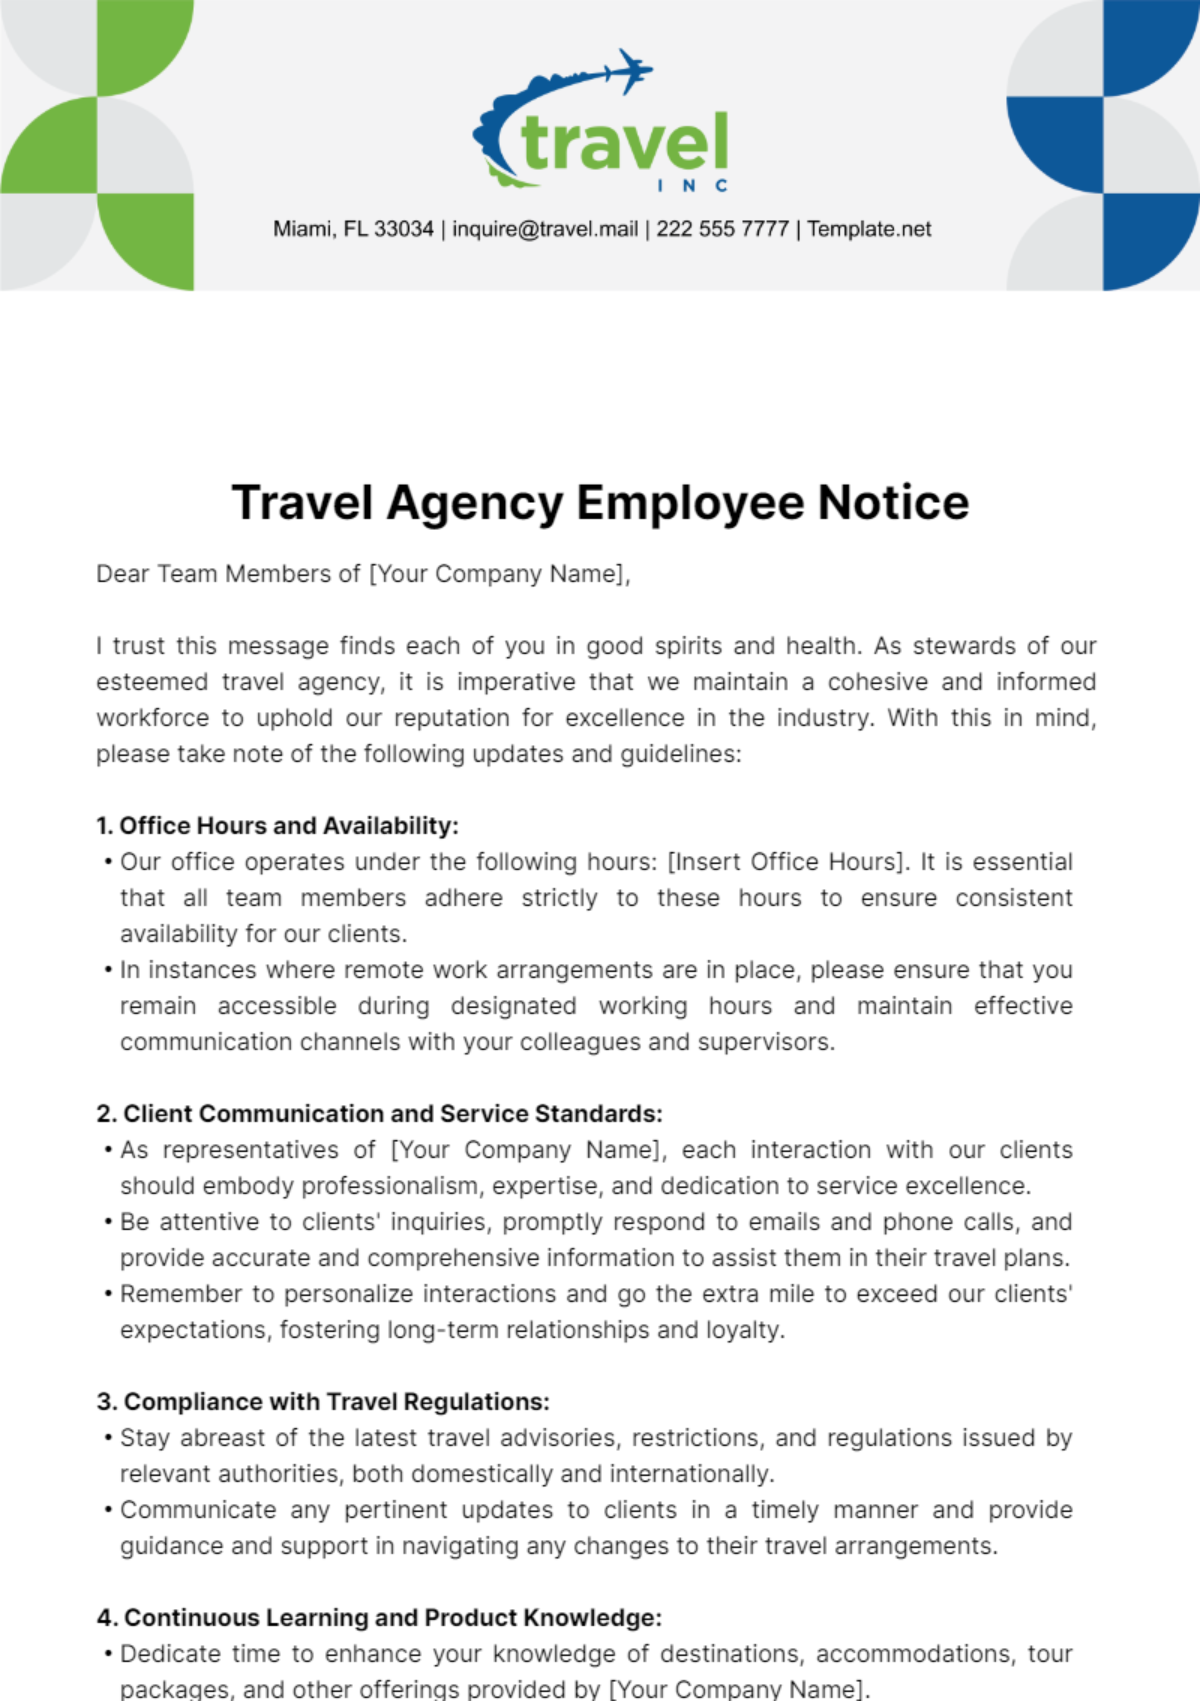 Travel Agency Employee Notice Template